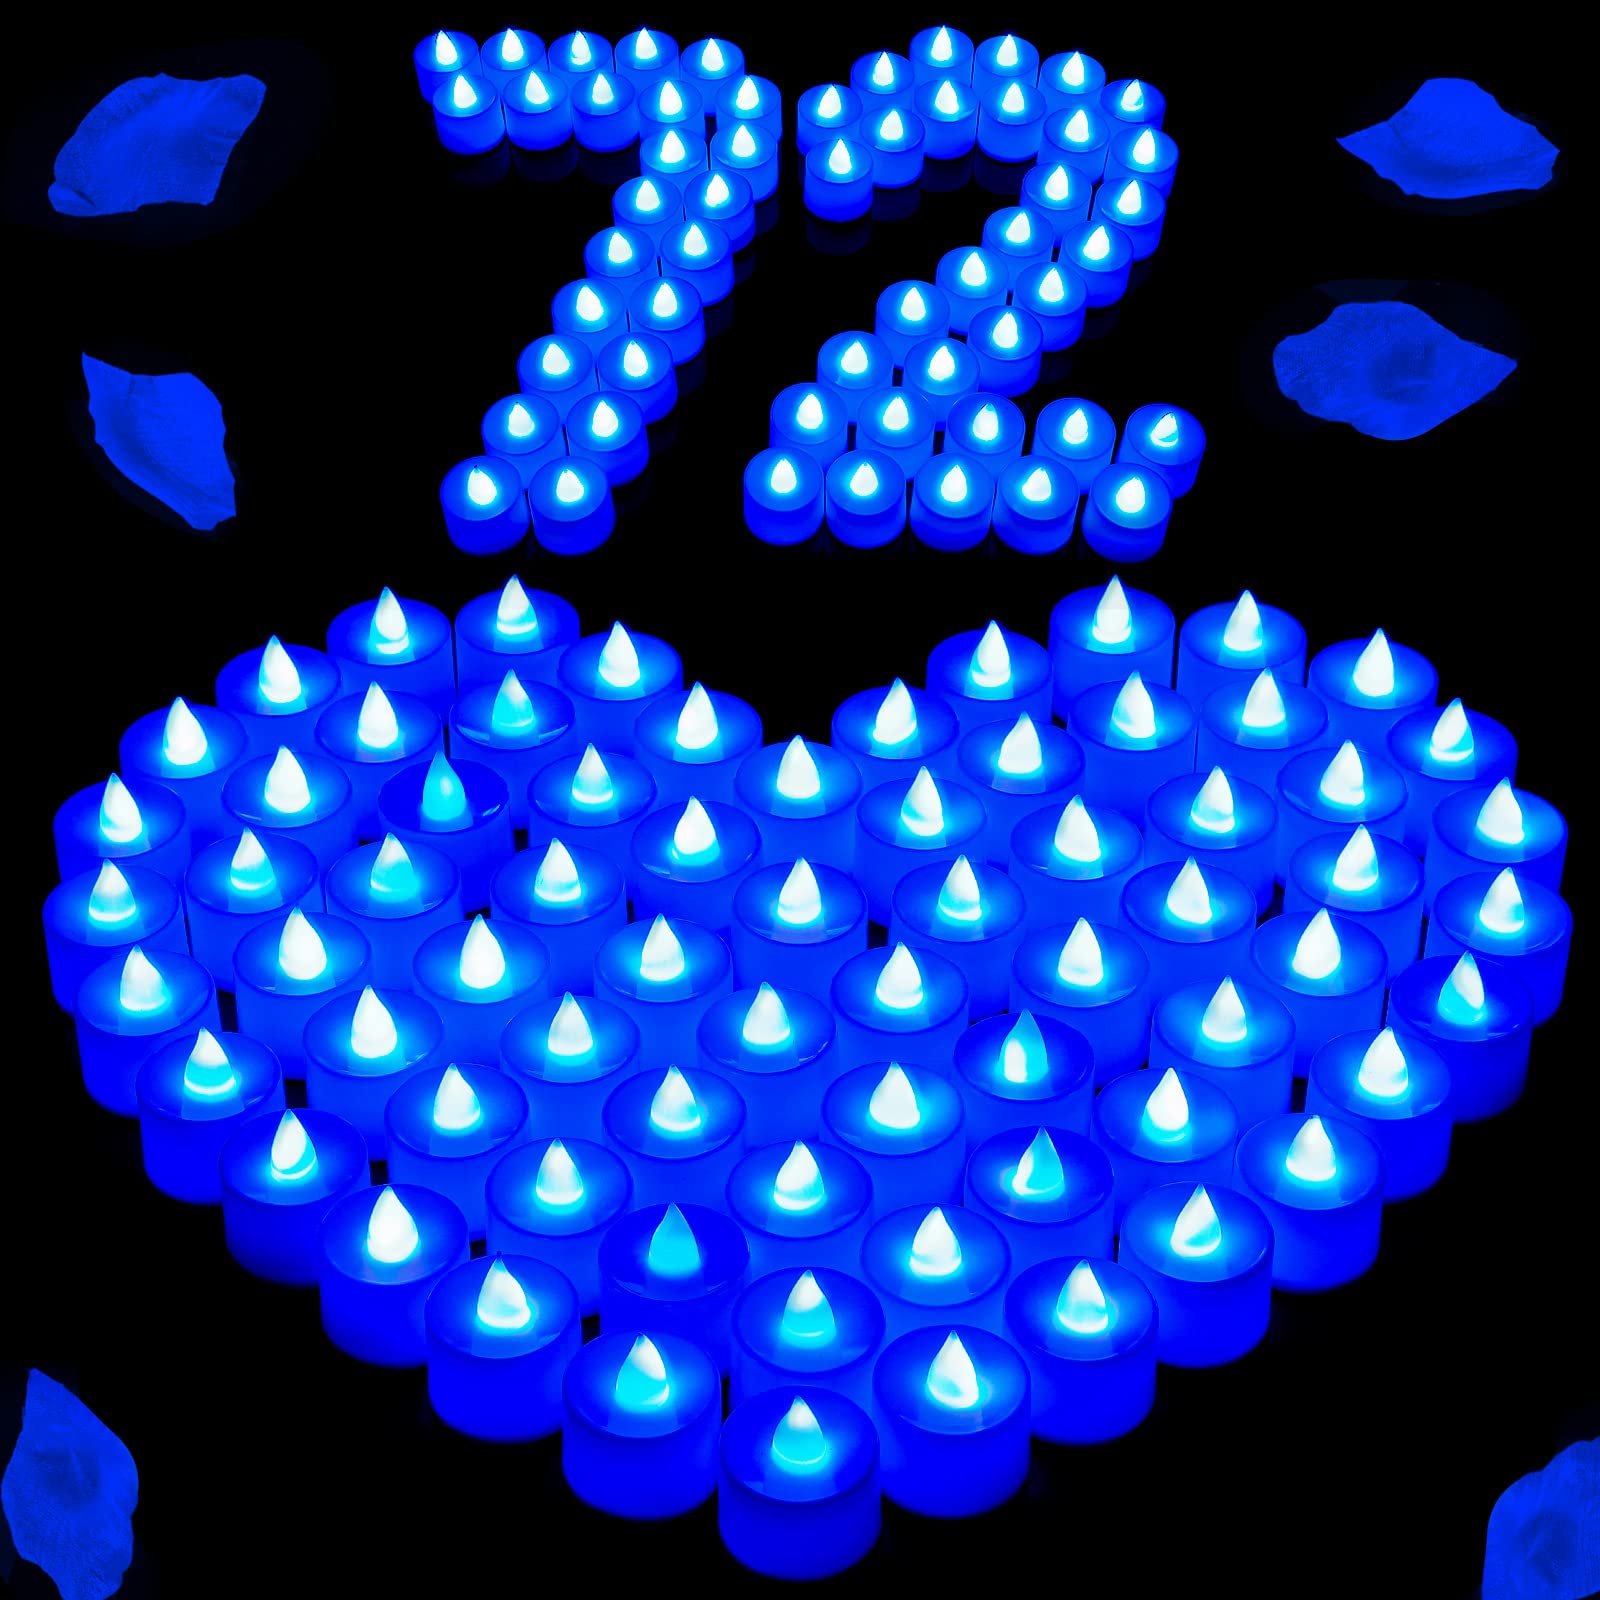 72 Pack Flameless Tea Lights Candles Blue LED Candles Wedding Flameless Flickering LED Candles Battery Operated Blue Tea Light Candle for Romantic Night Honeymoon Table Decor